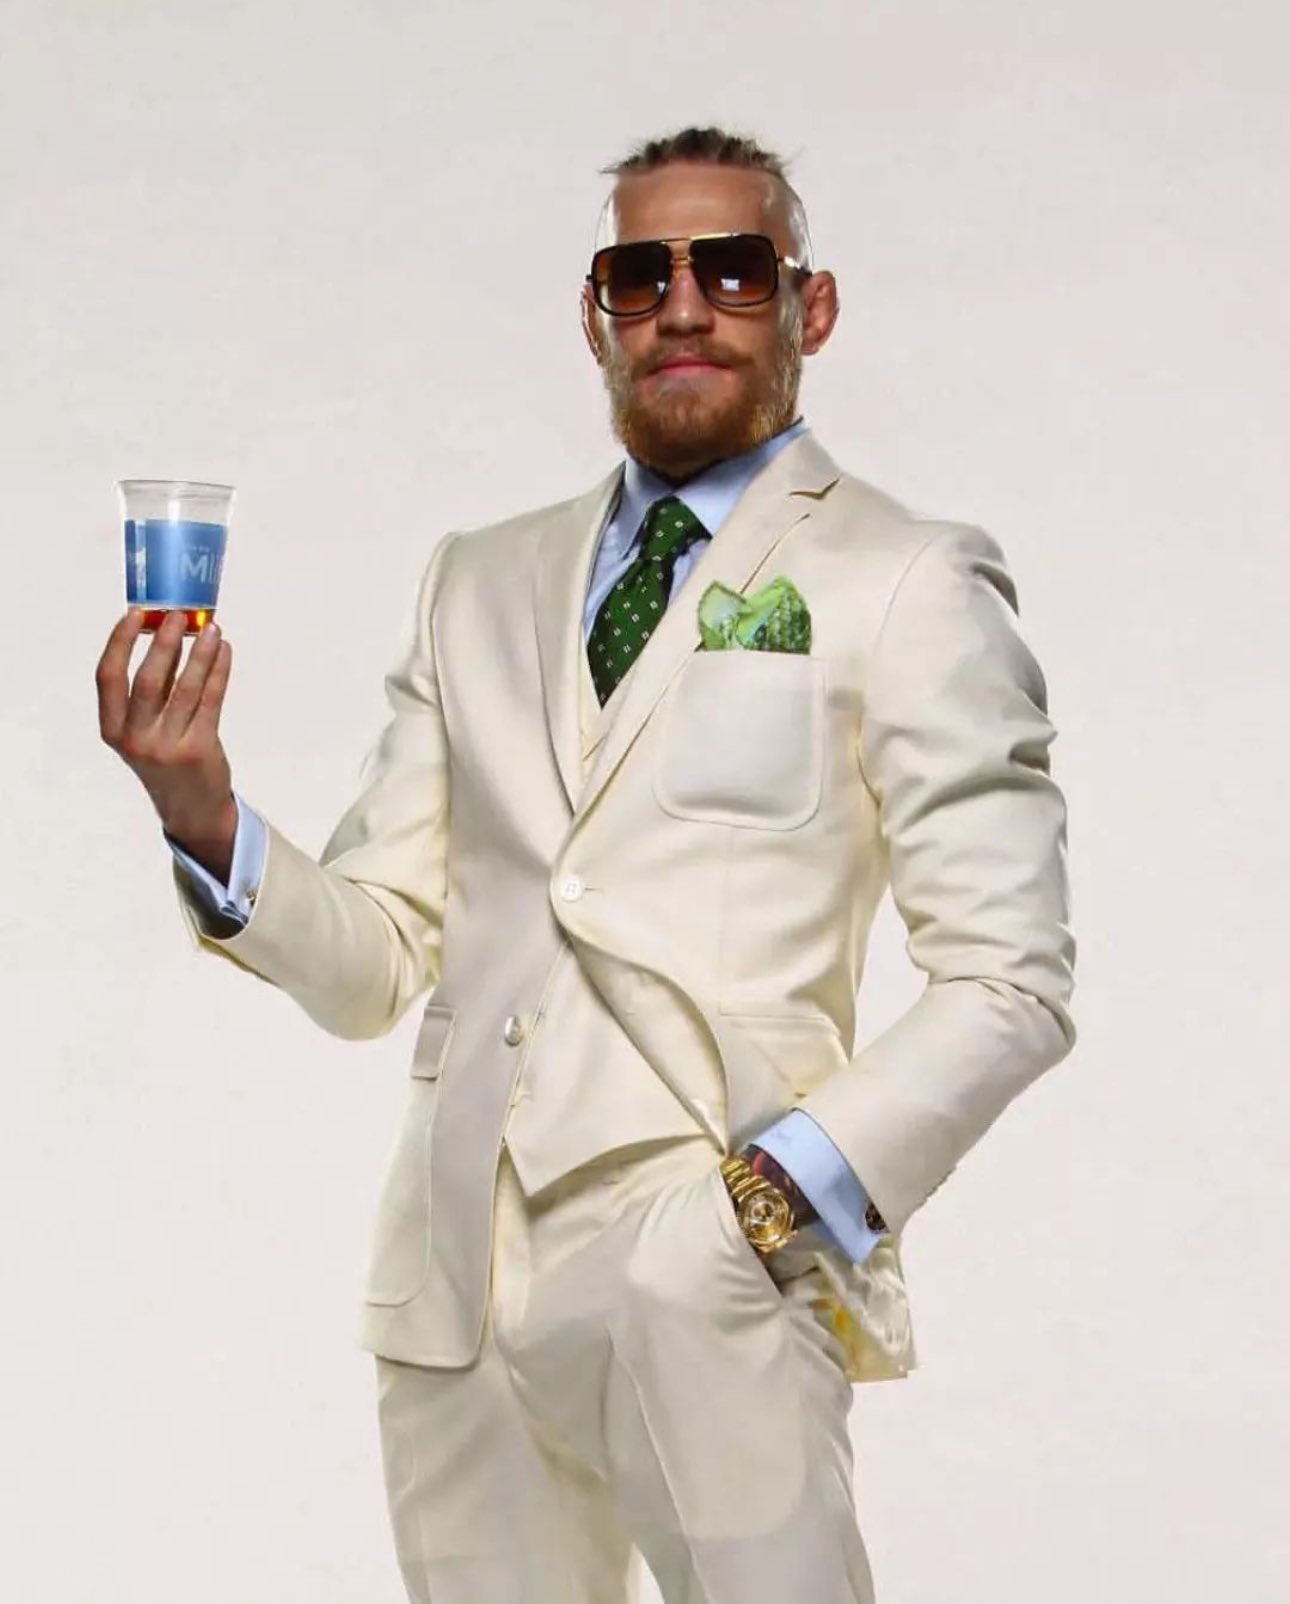 Conor McGregor, UFC standout, strongly suggests a potential run for the presidency.